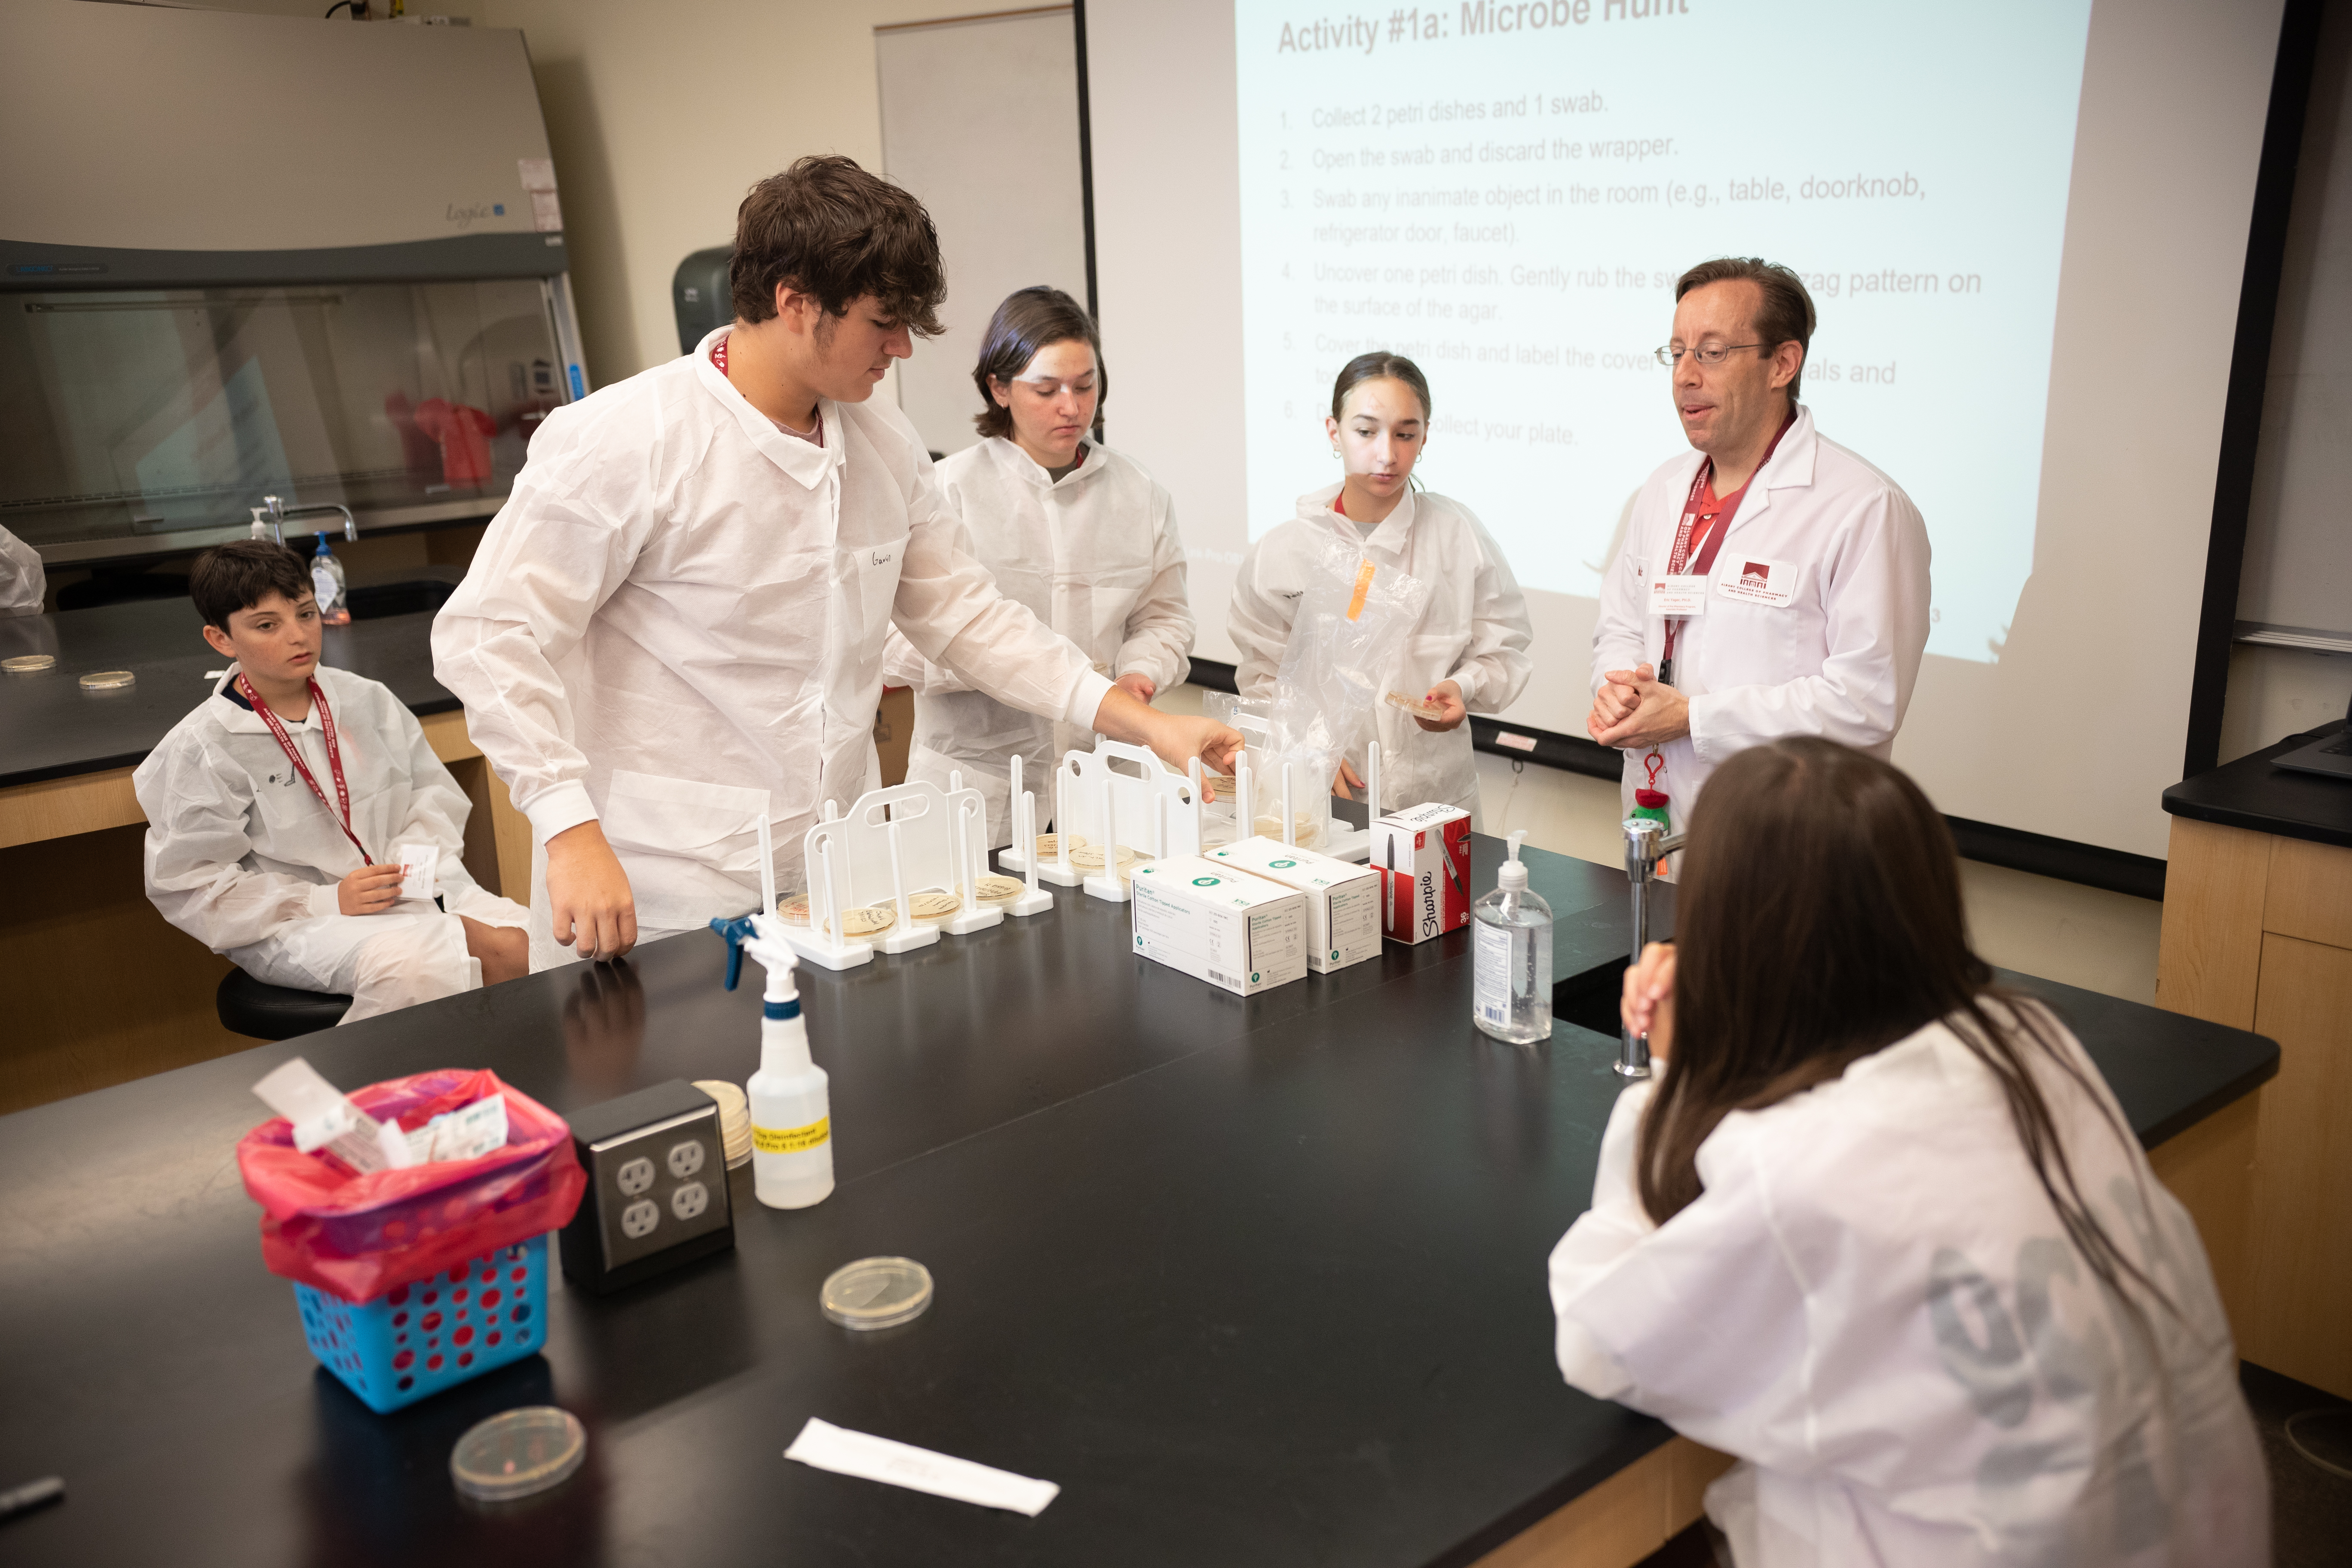 Students in white lab coats work in a lab during a summer camp.